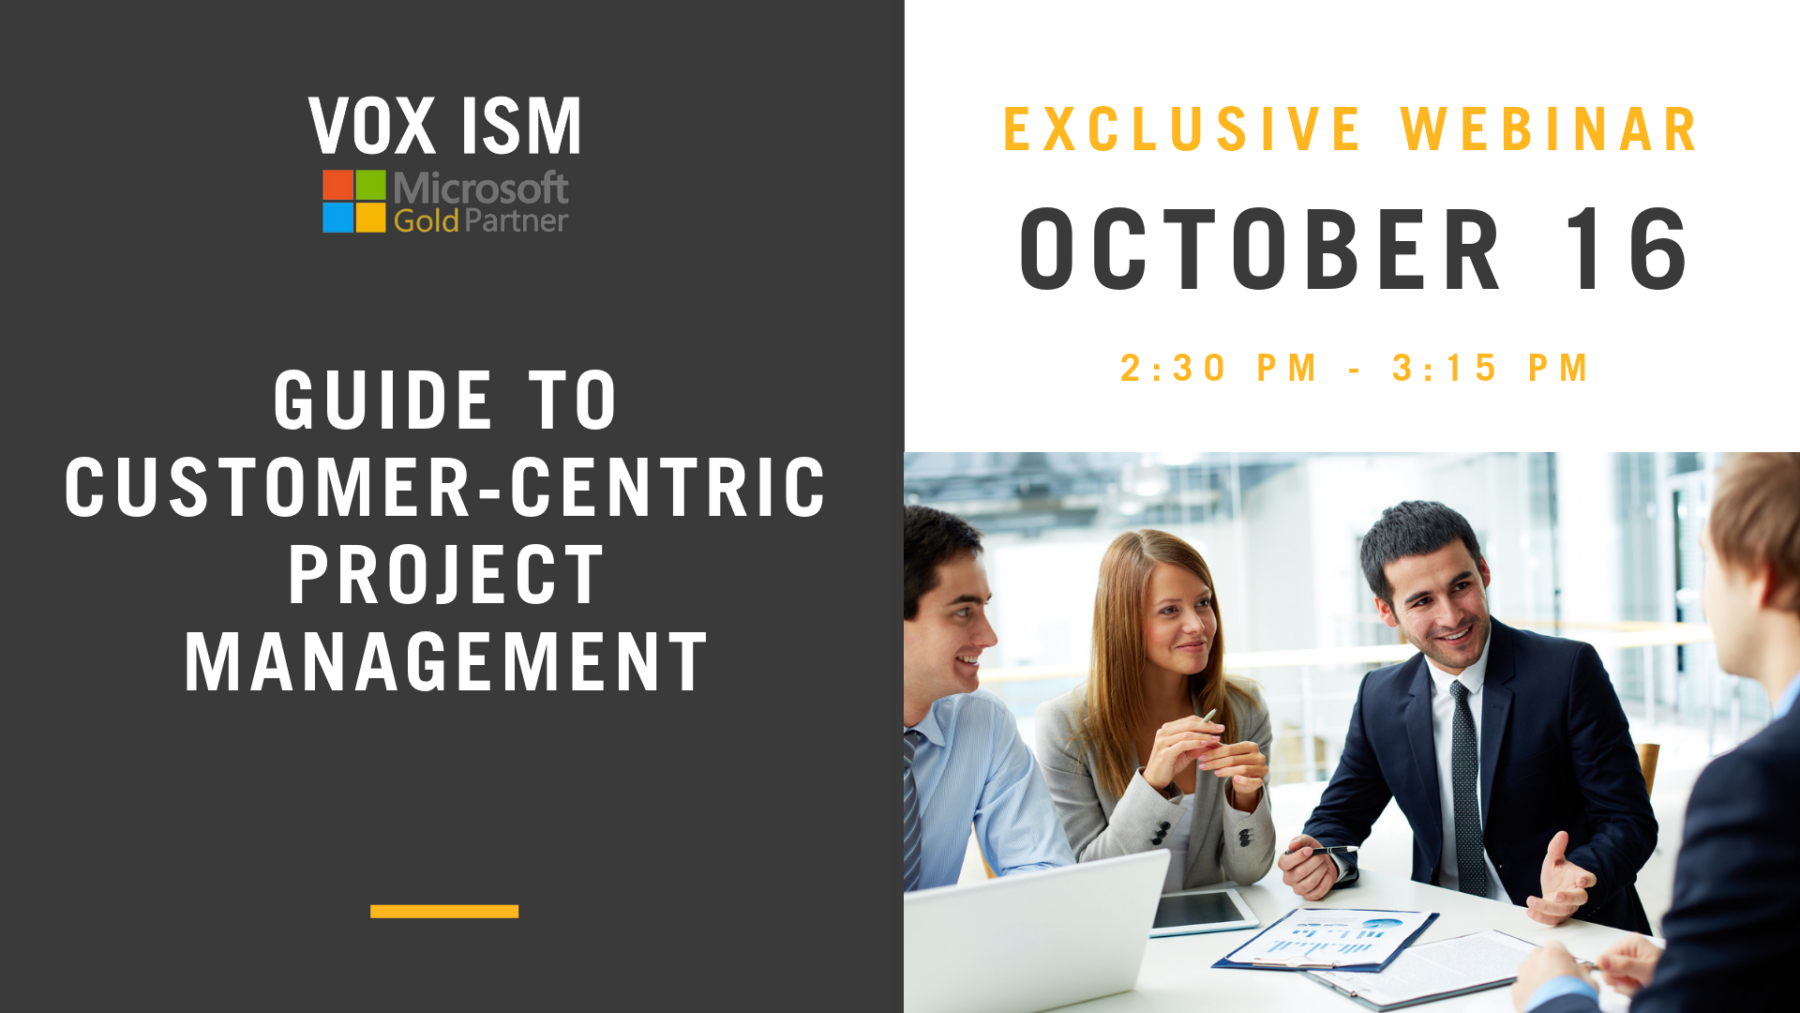 Guide to Customer-Centric Project Management - October 16 - Webinar - VOX ISM